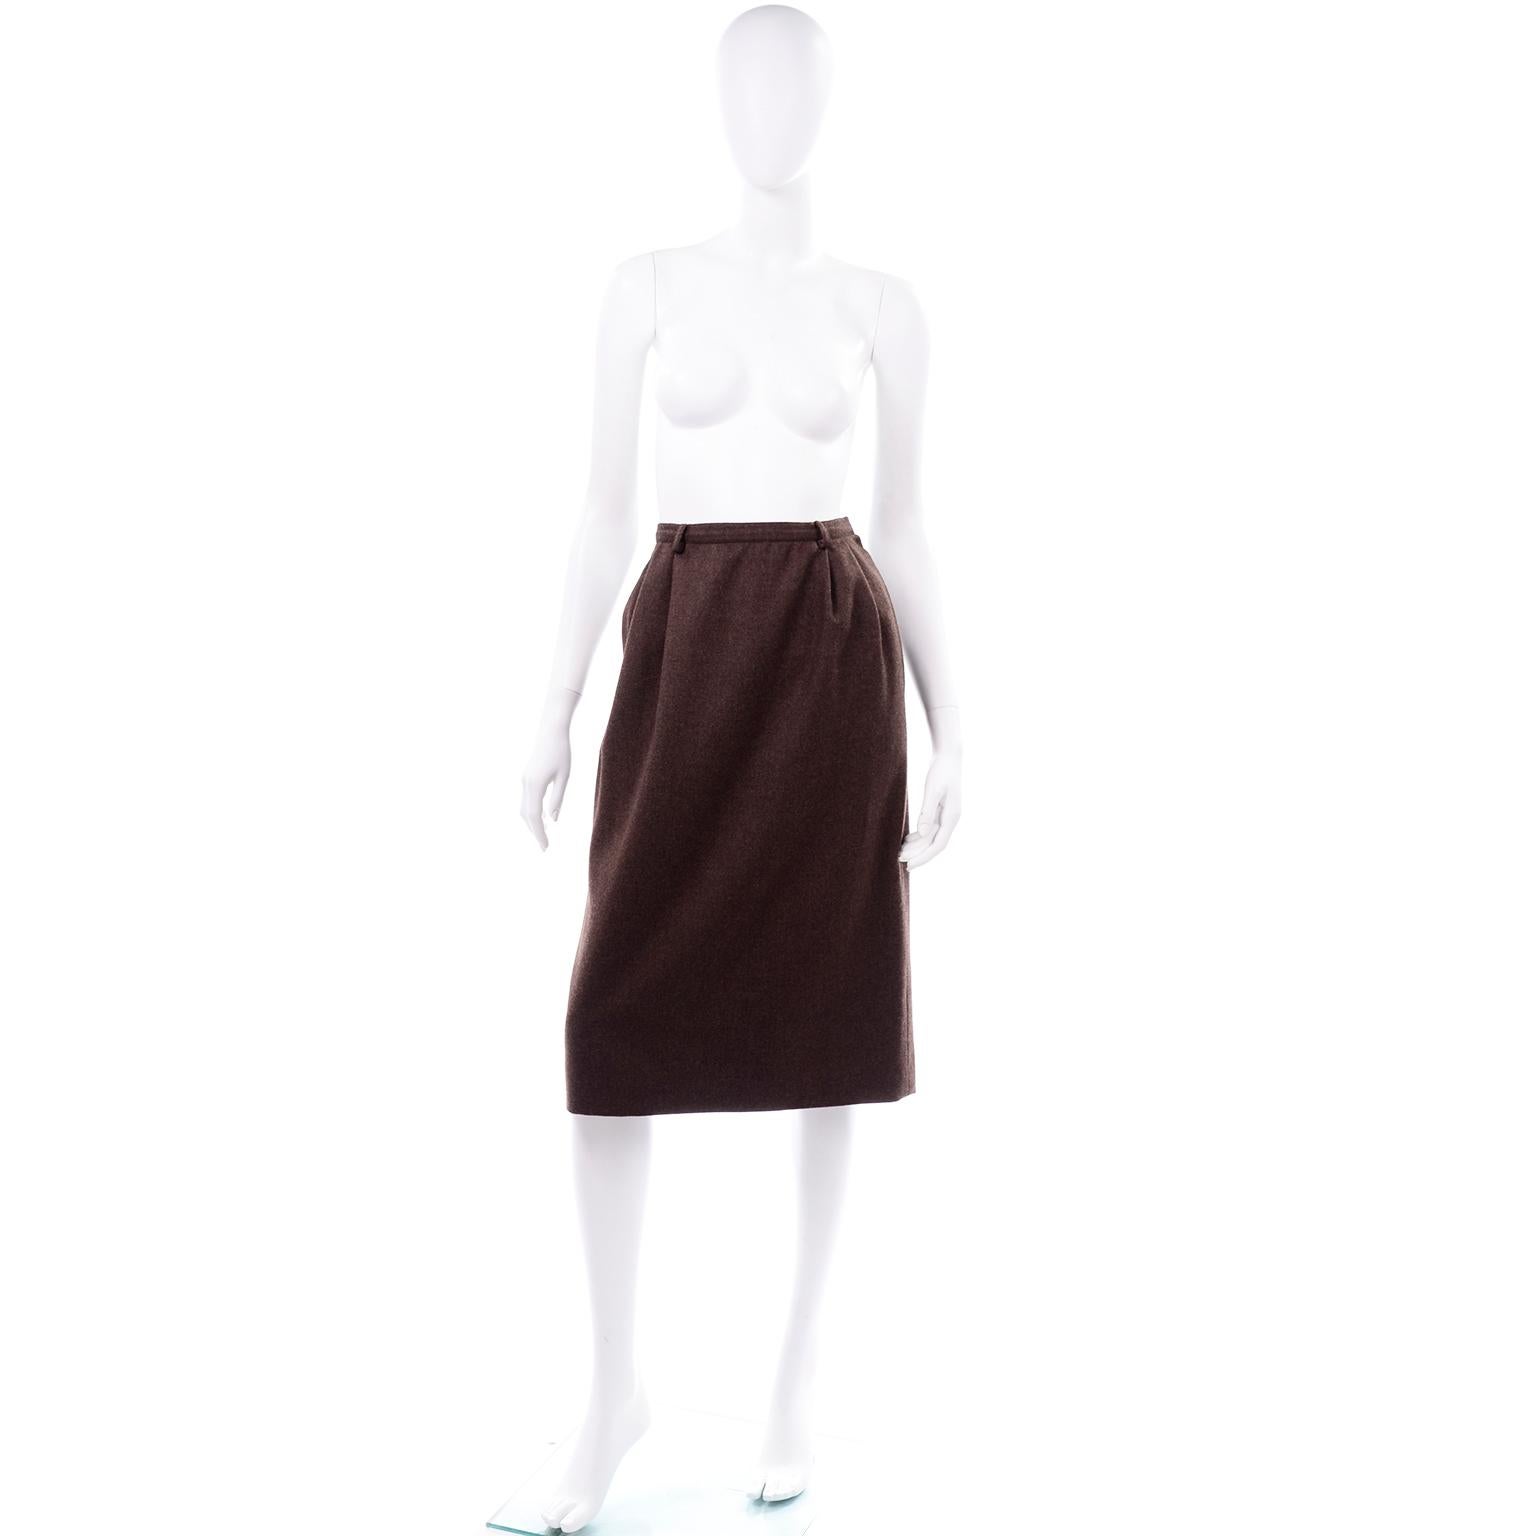 We love this classic brown wool pencil skirt from Valentino Boutique. This vintage Valentino skirt came from an estate we acquired many years ago that included the finest designer pieces we've ever come across! Everything in this collection was in